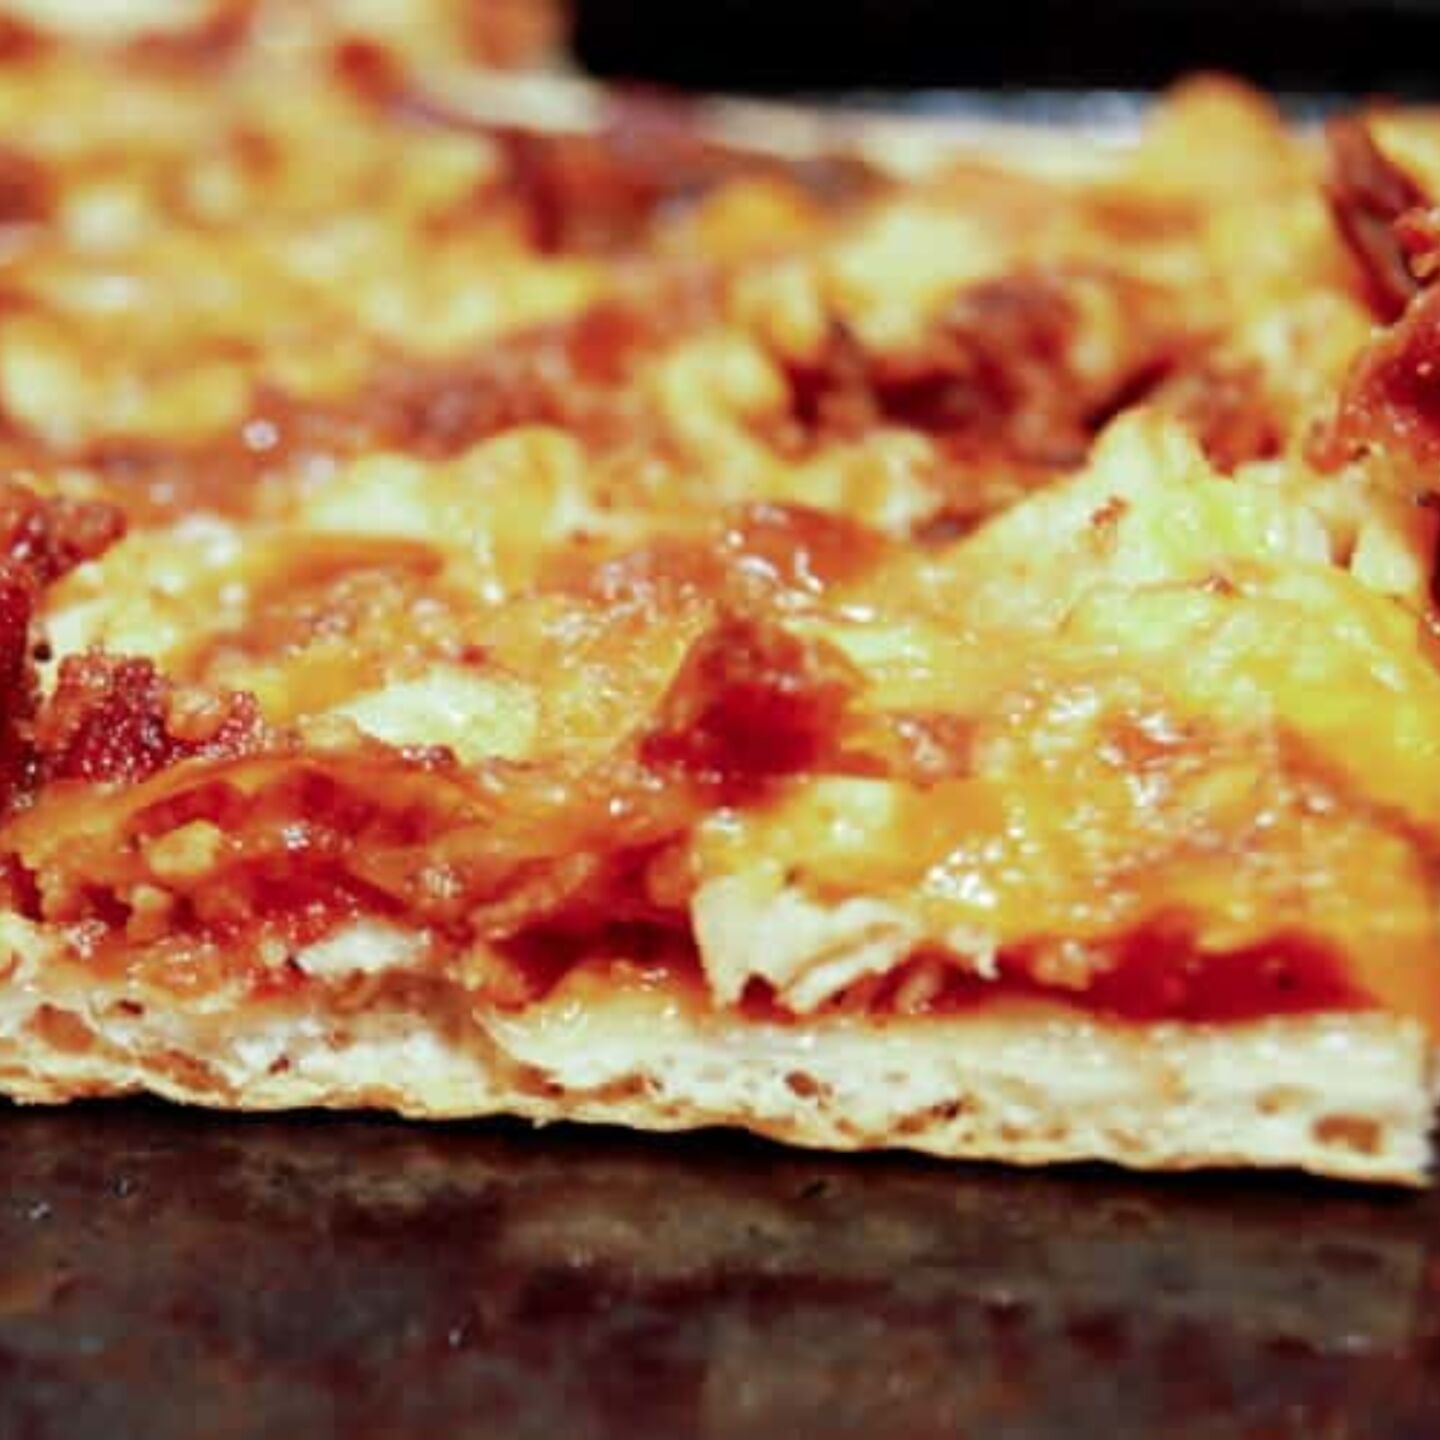 7. Bbq chicken and bacon pizza